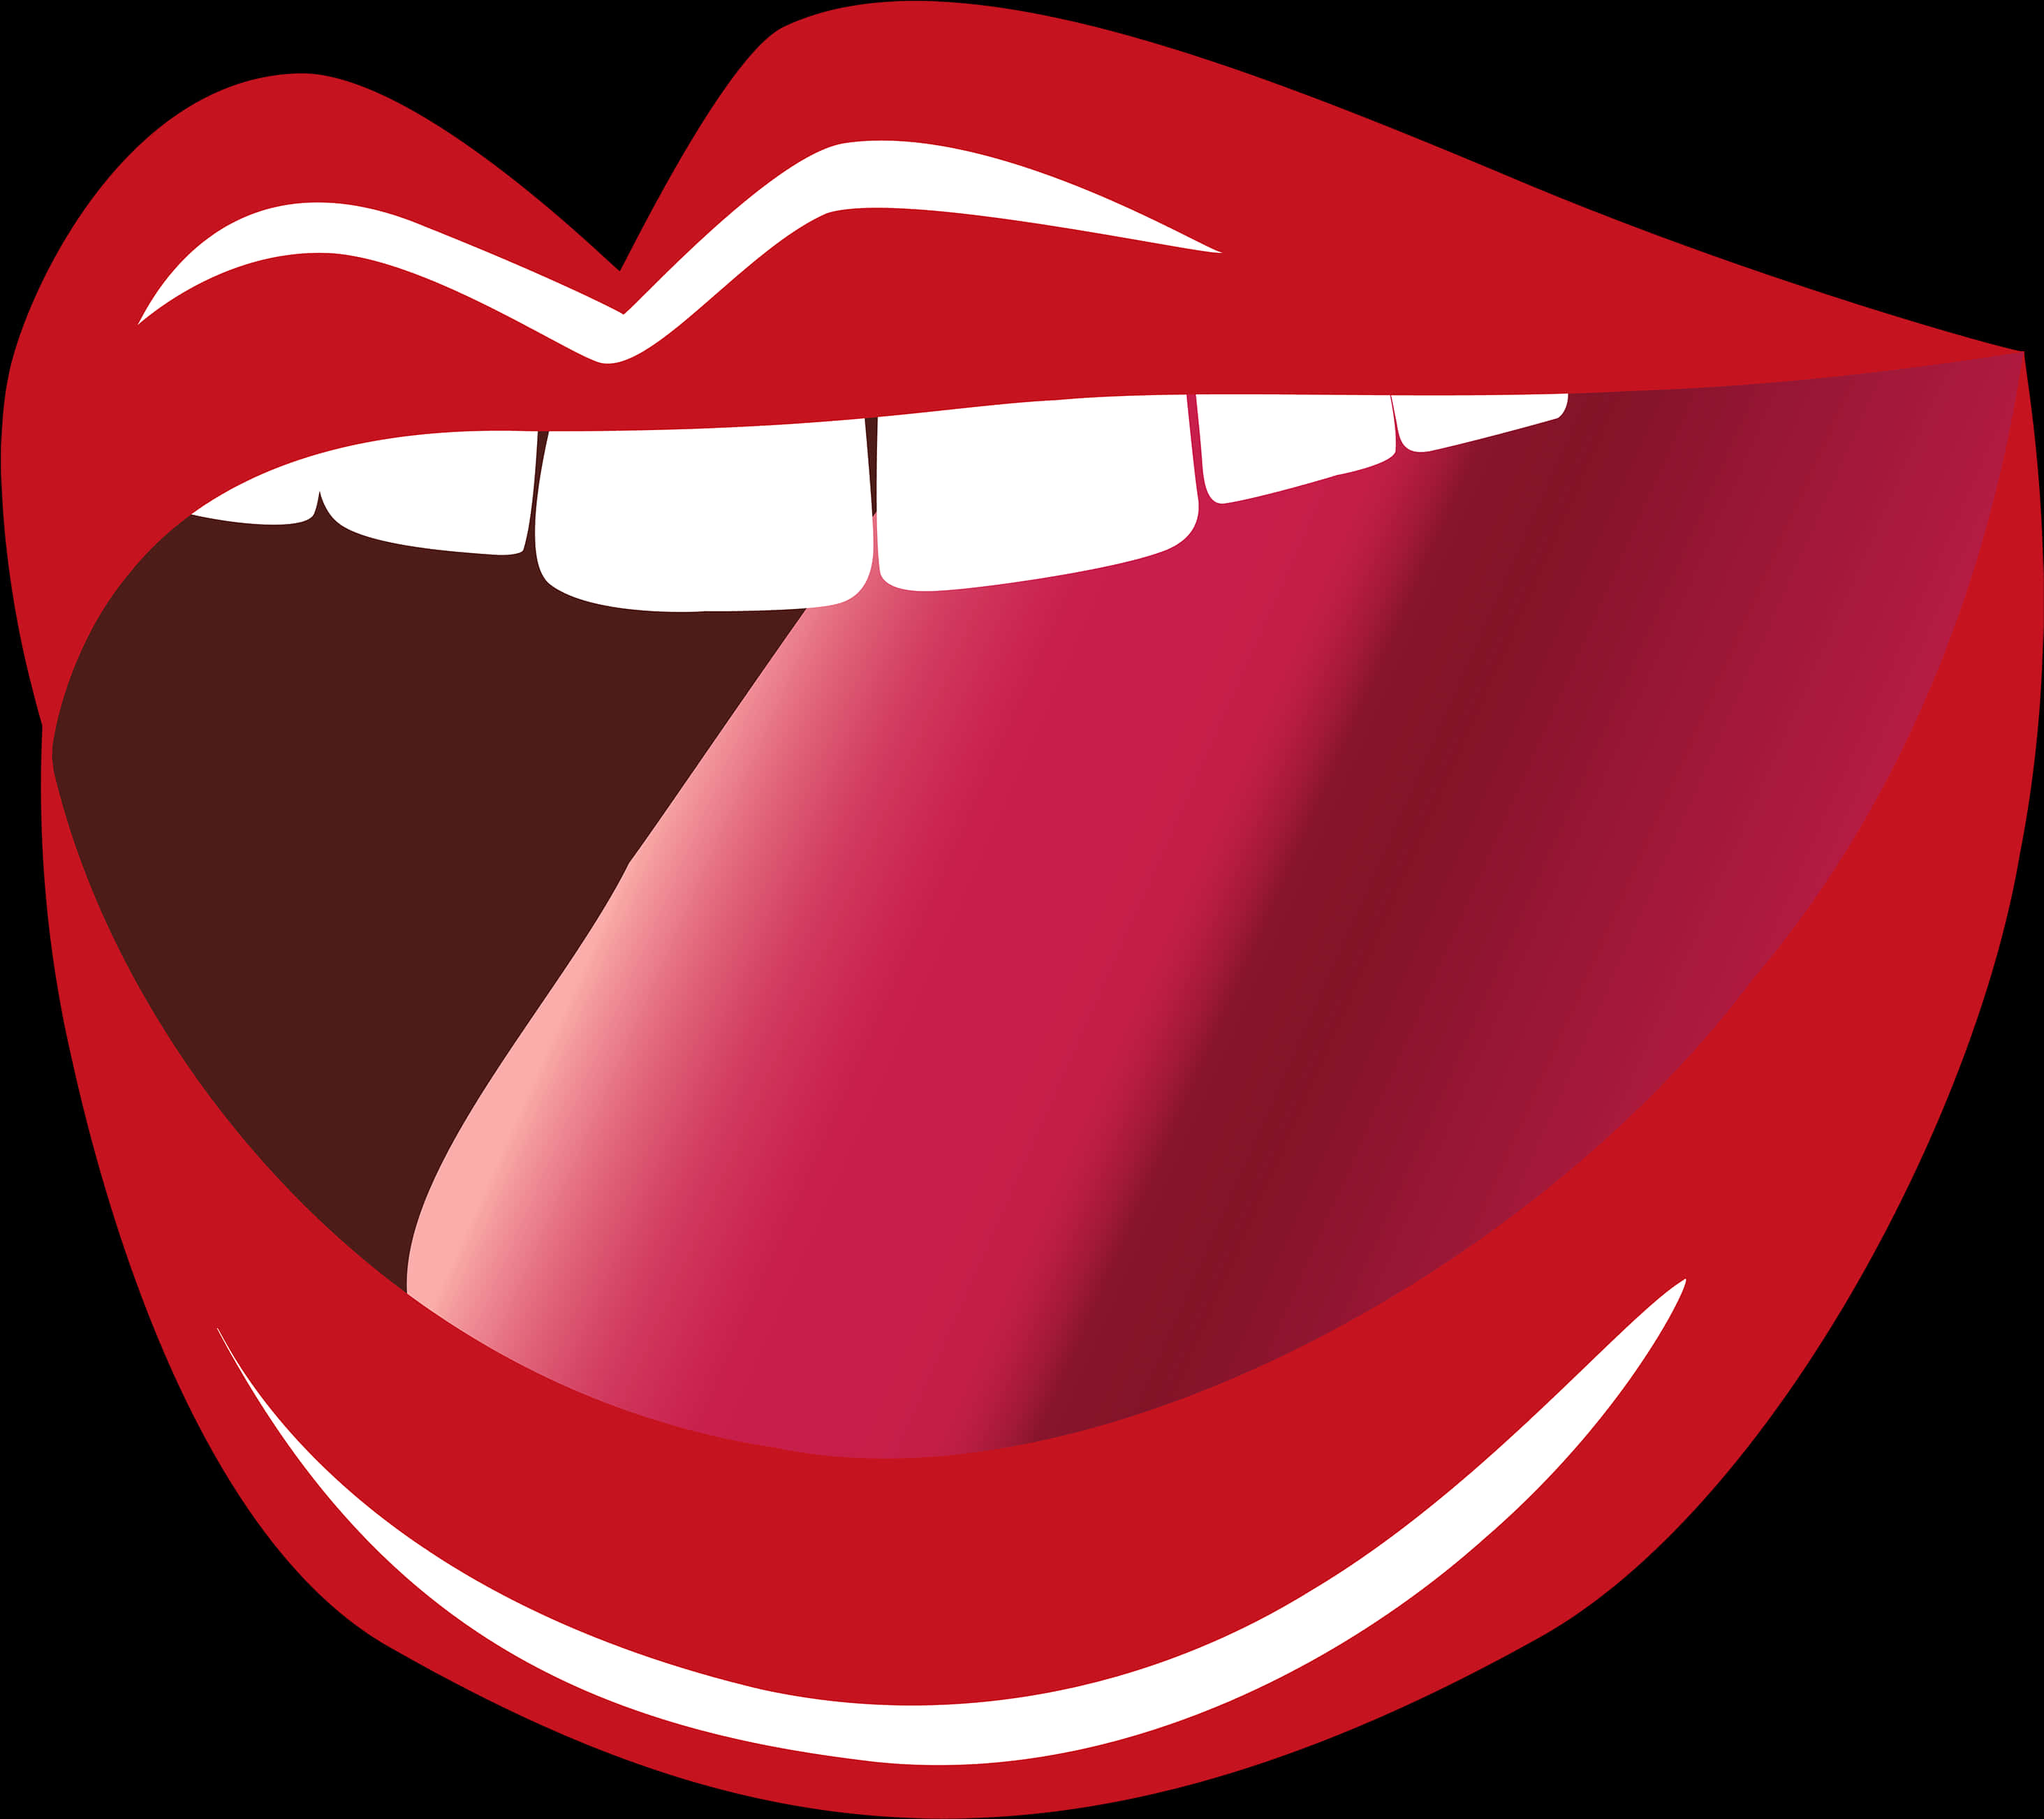 Cartoon Smiling Mouth Graphic SVG